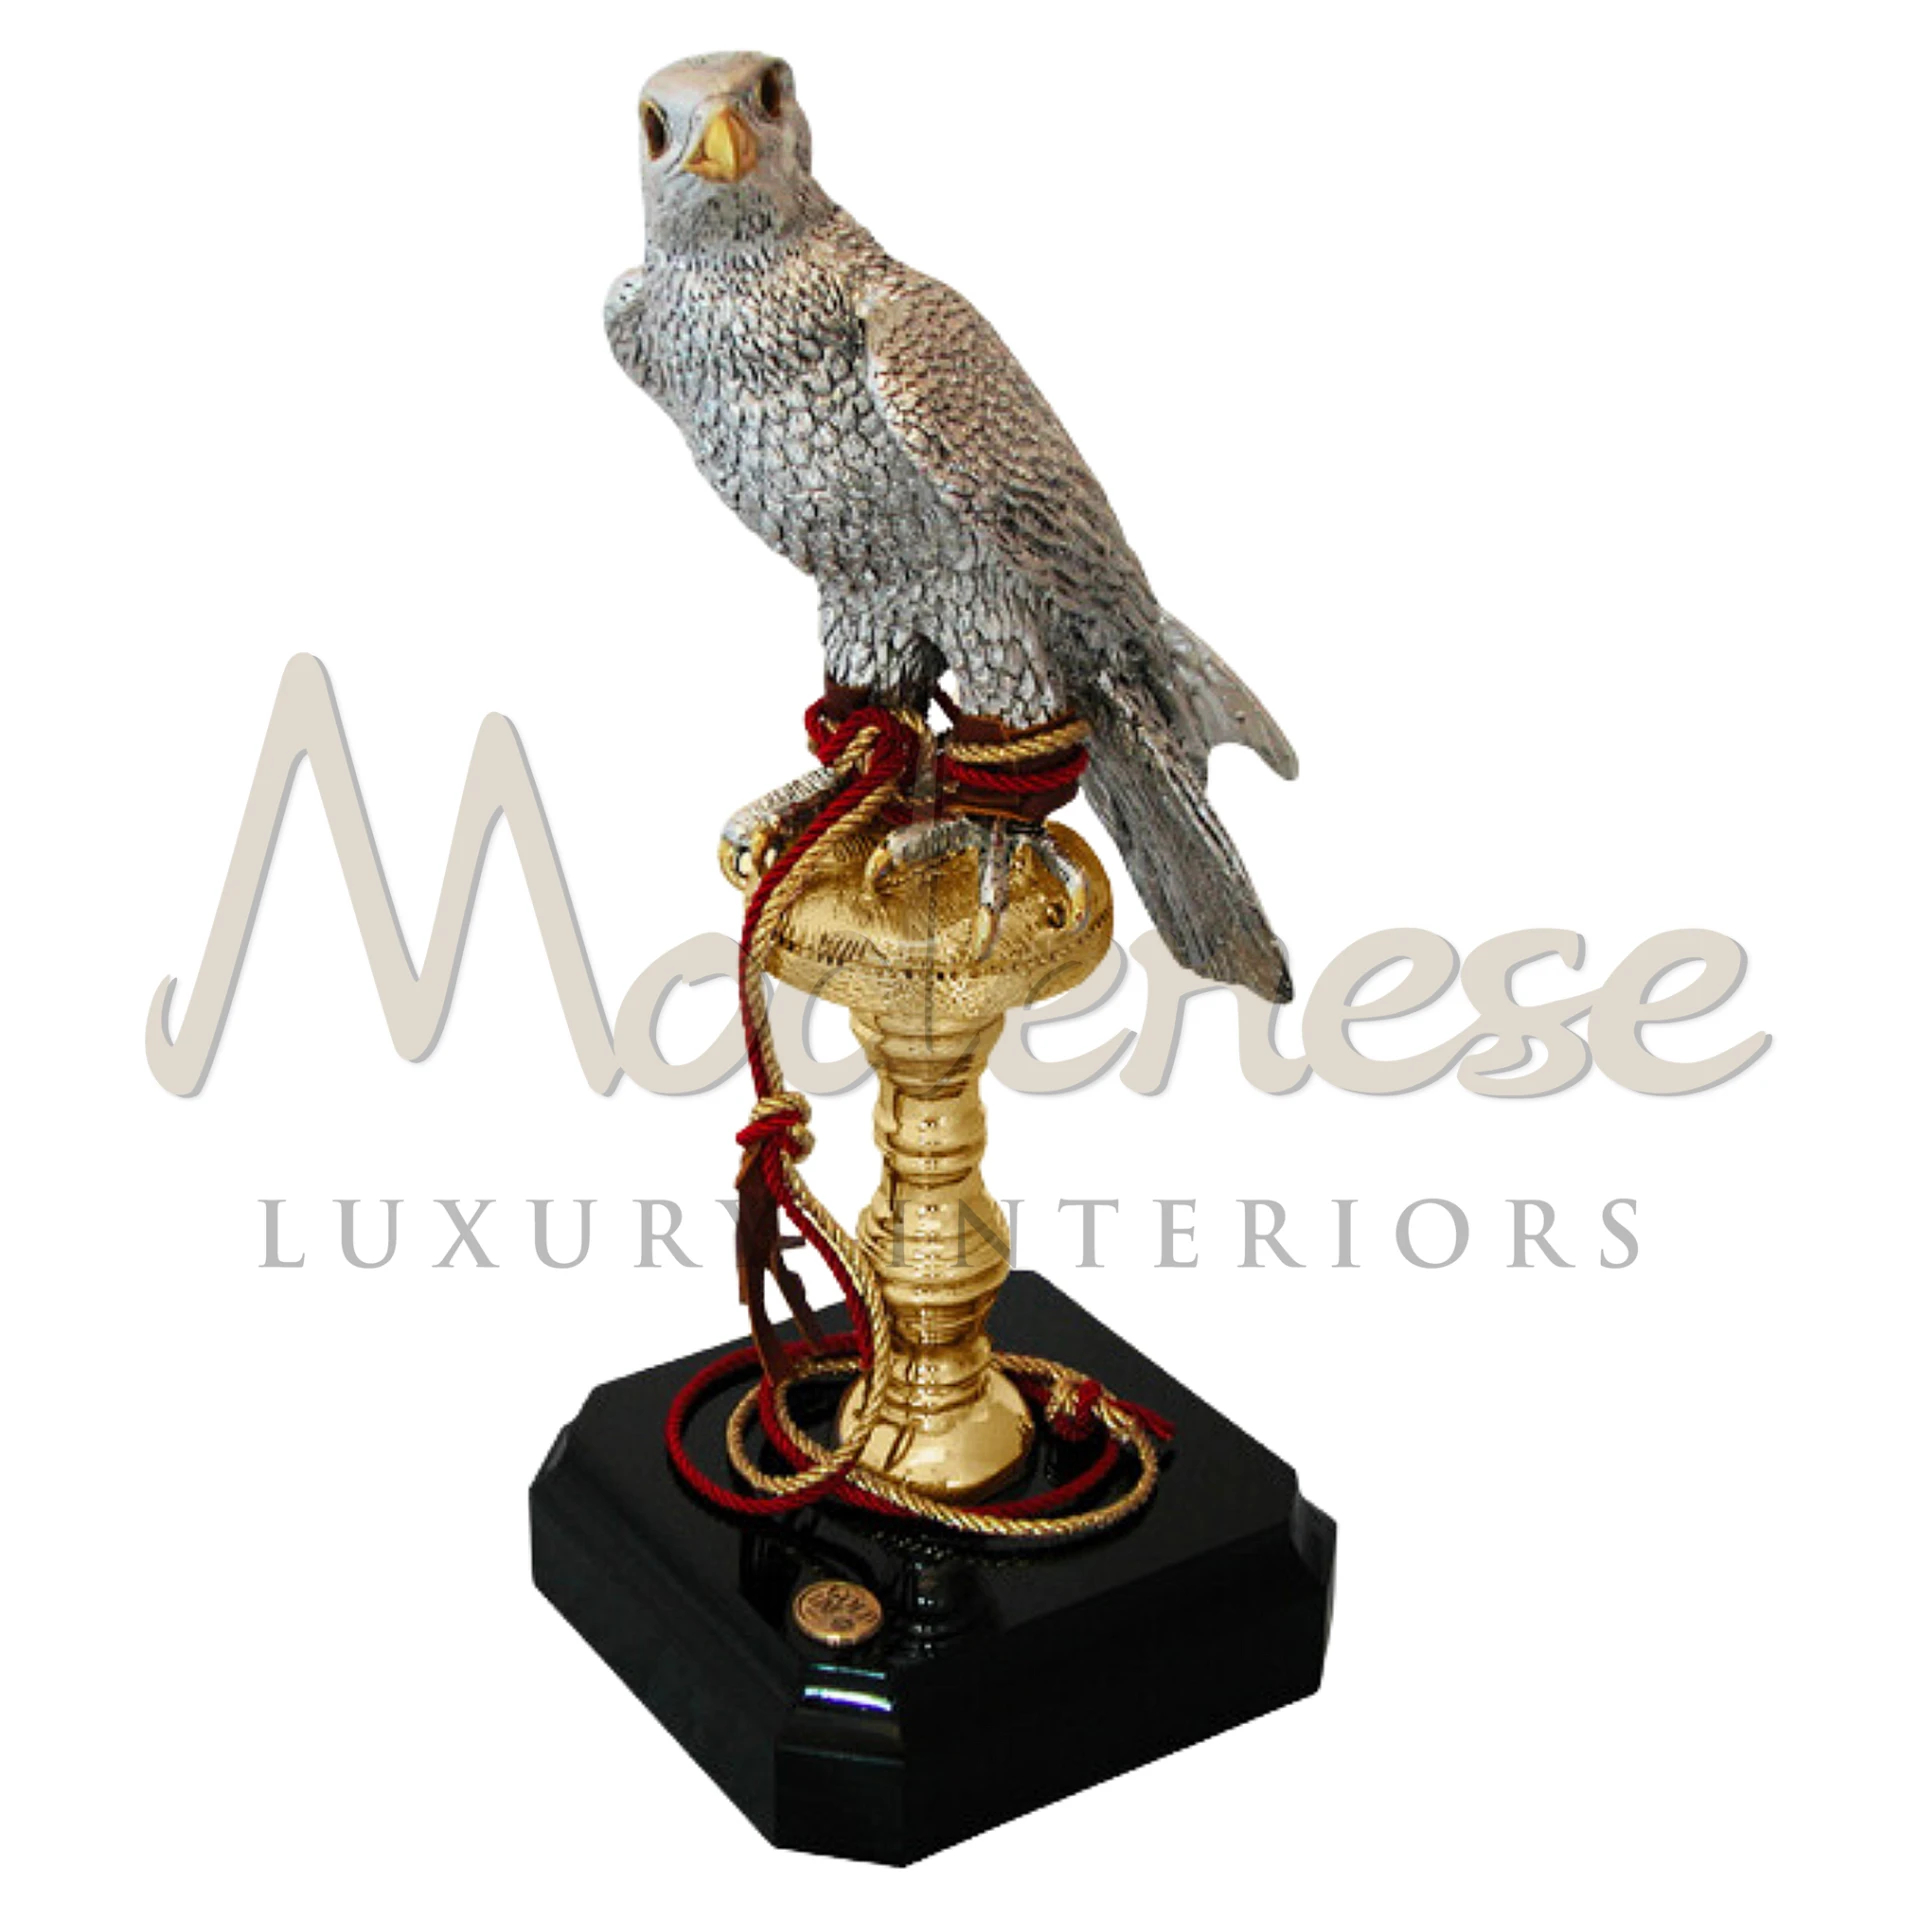 Luxurious Exquisite Falcon ornament in porcelain or crystal, detailed for a lifelike presence, ideal for elegant interior design and décor.